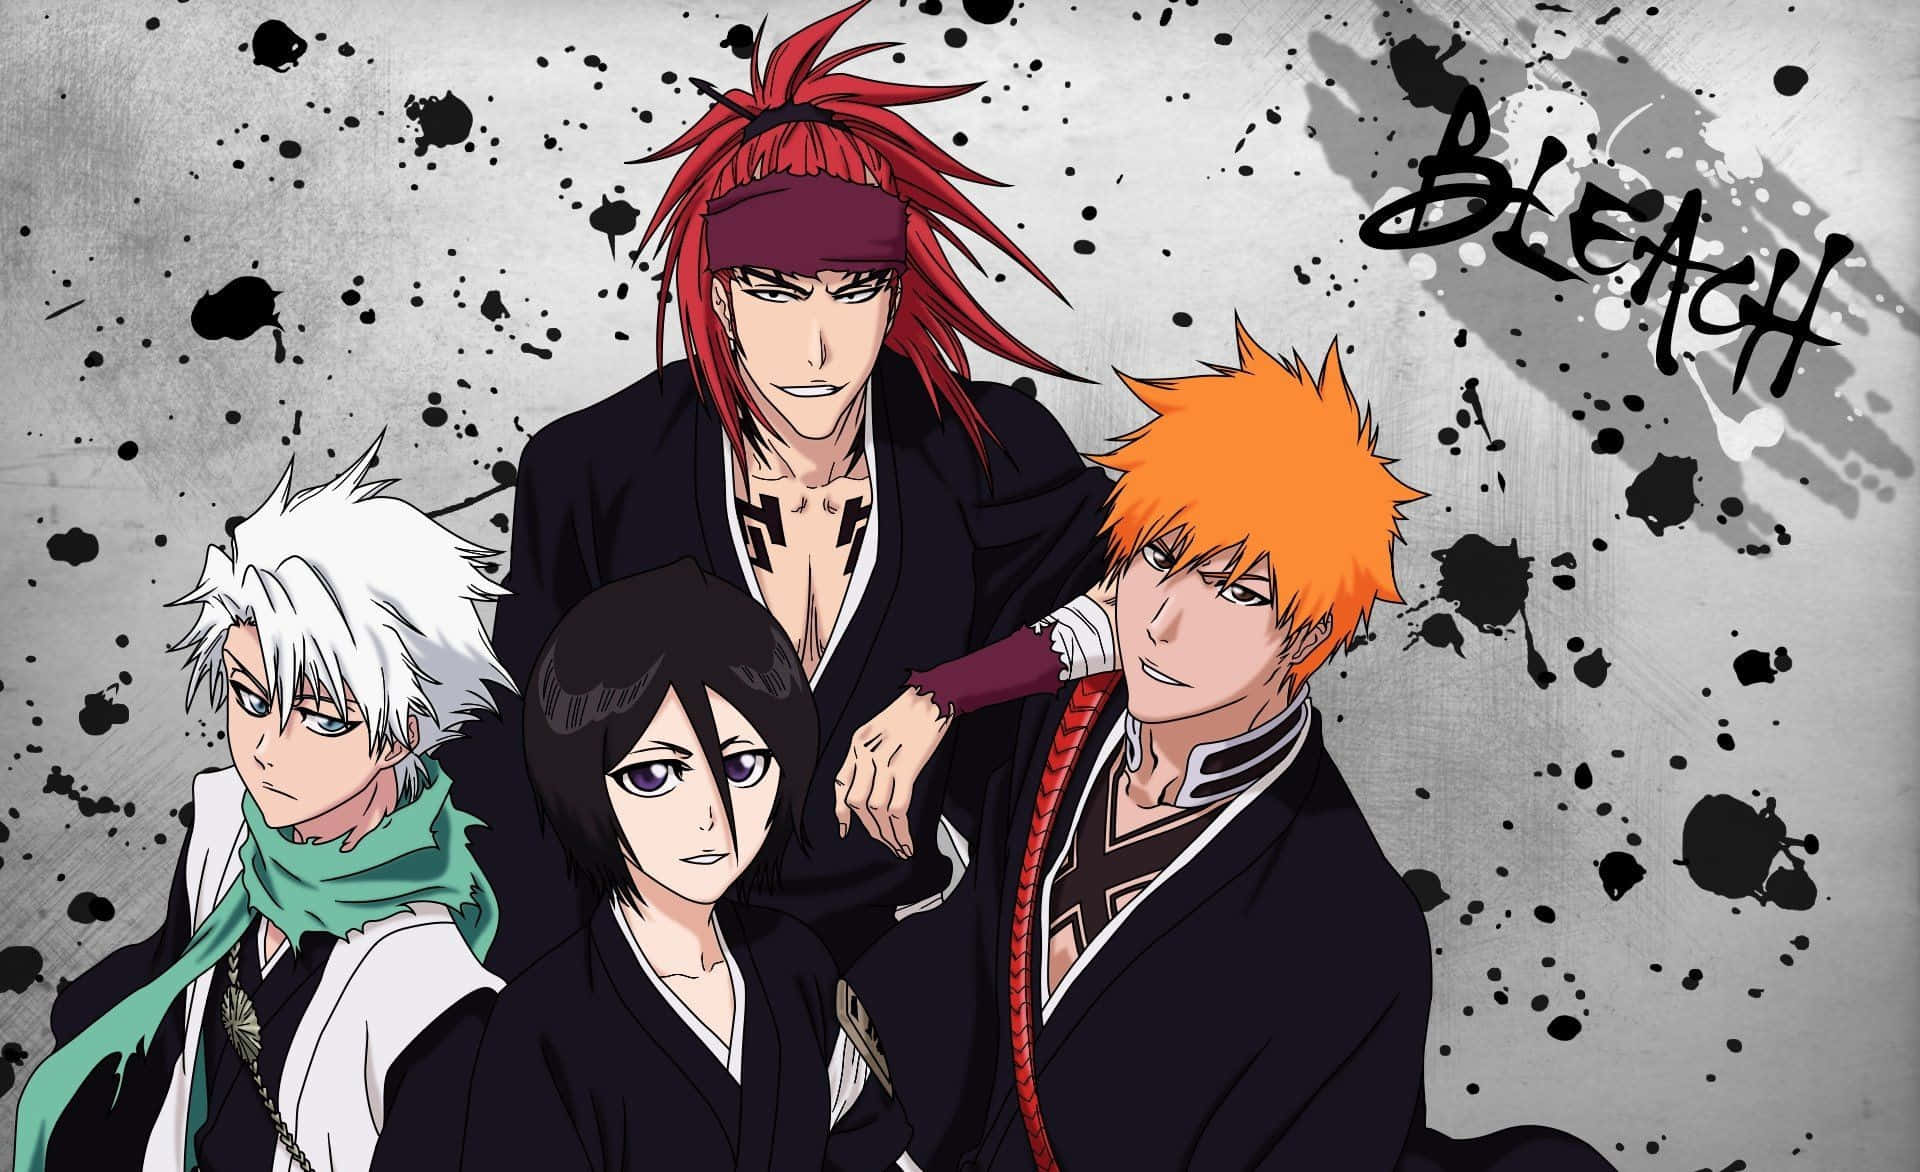 Ichigo is the Substitute Soul Reaper undertaking missions to protect the world of the living from dangerous Hollows